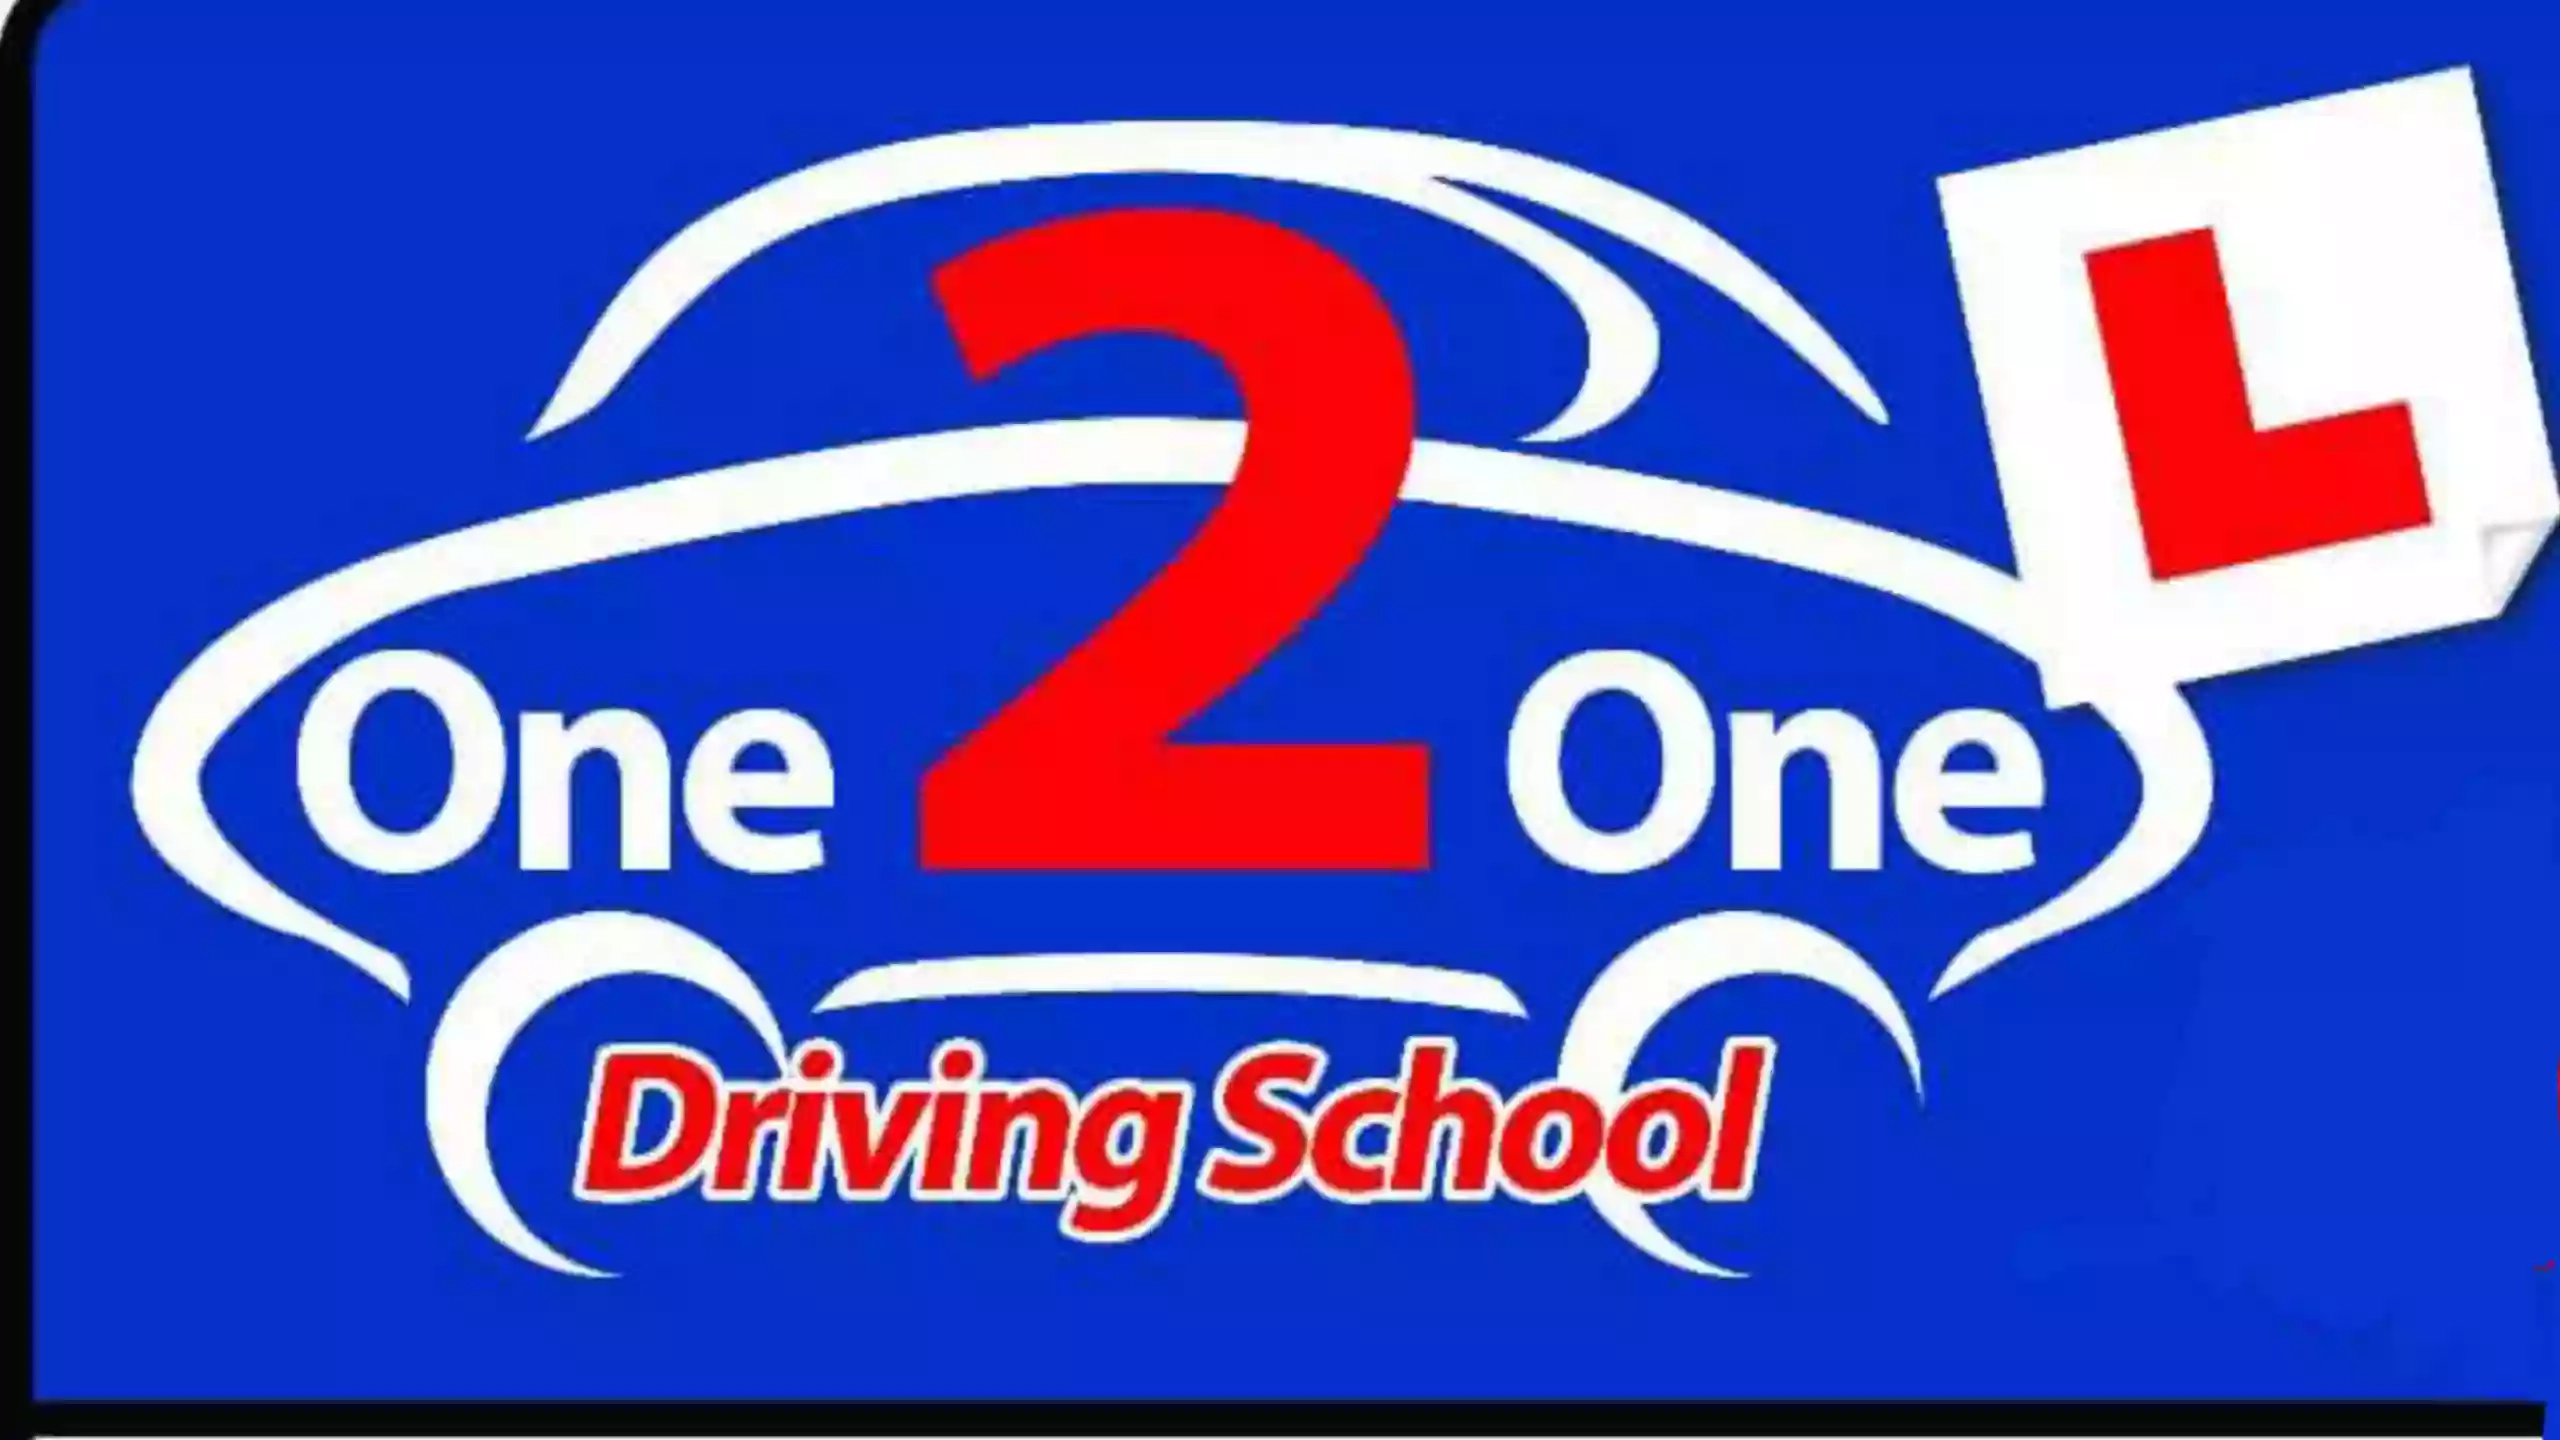 one2one Driving School